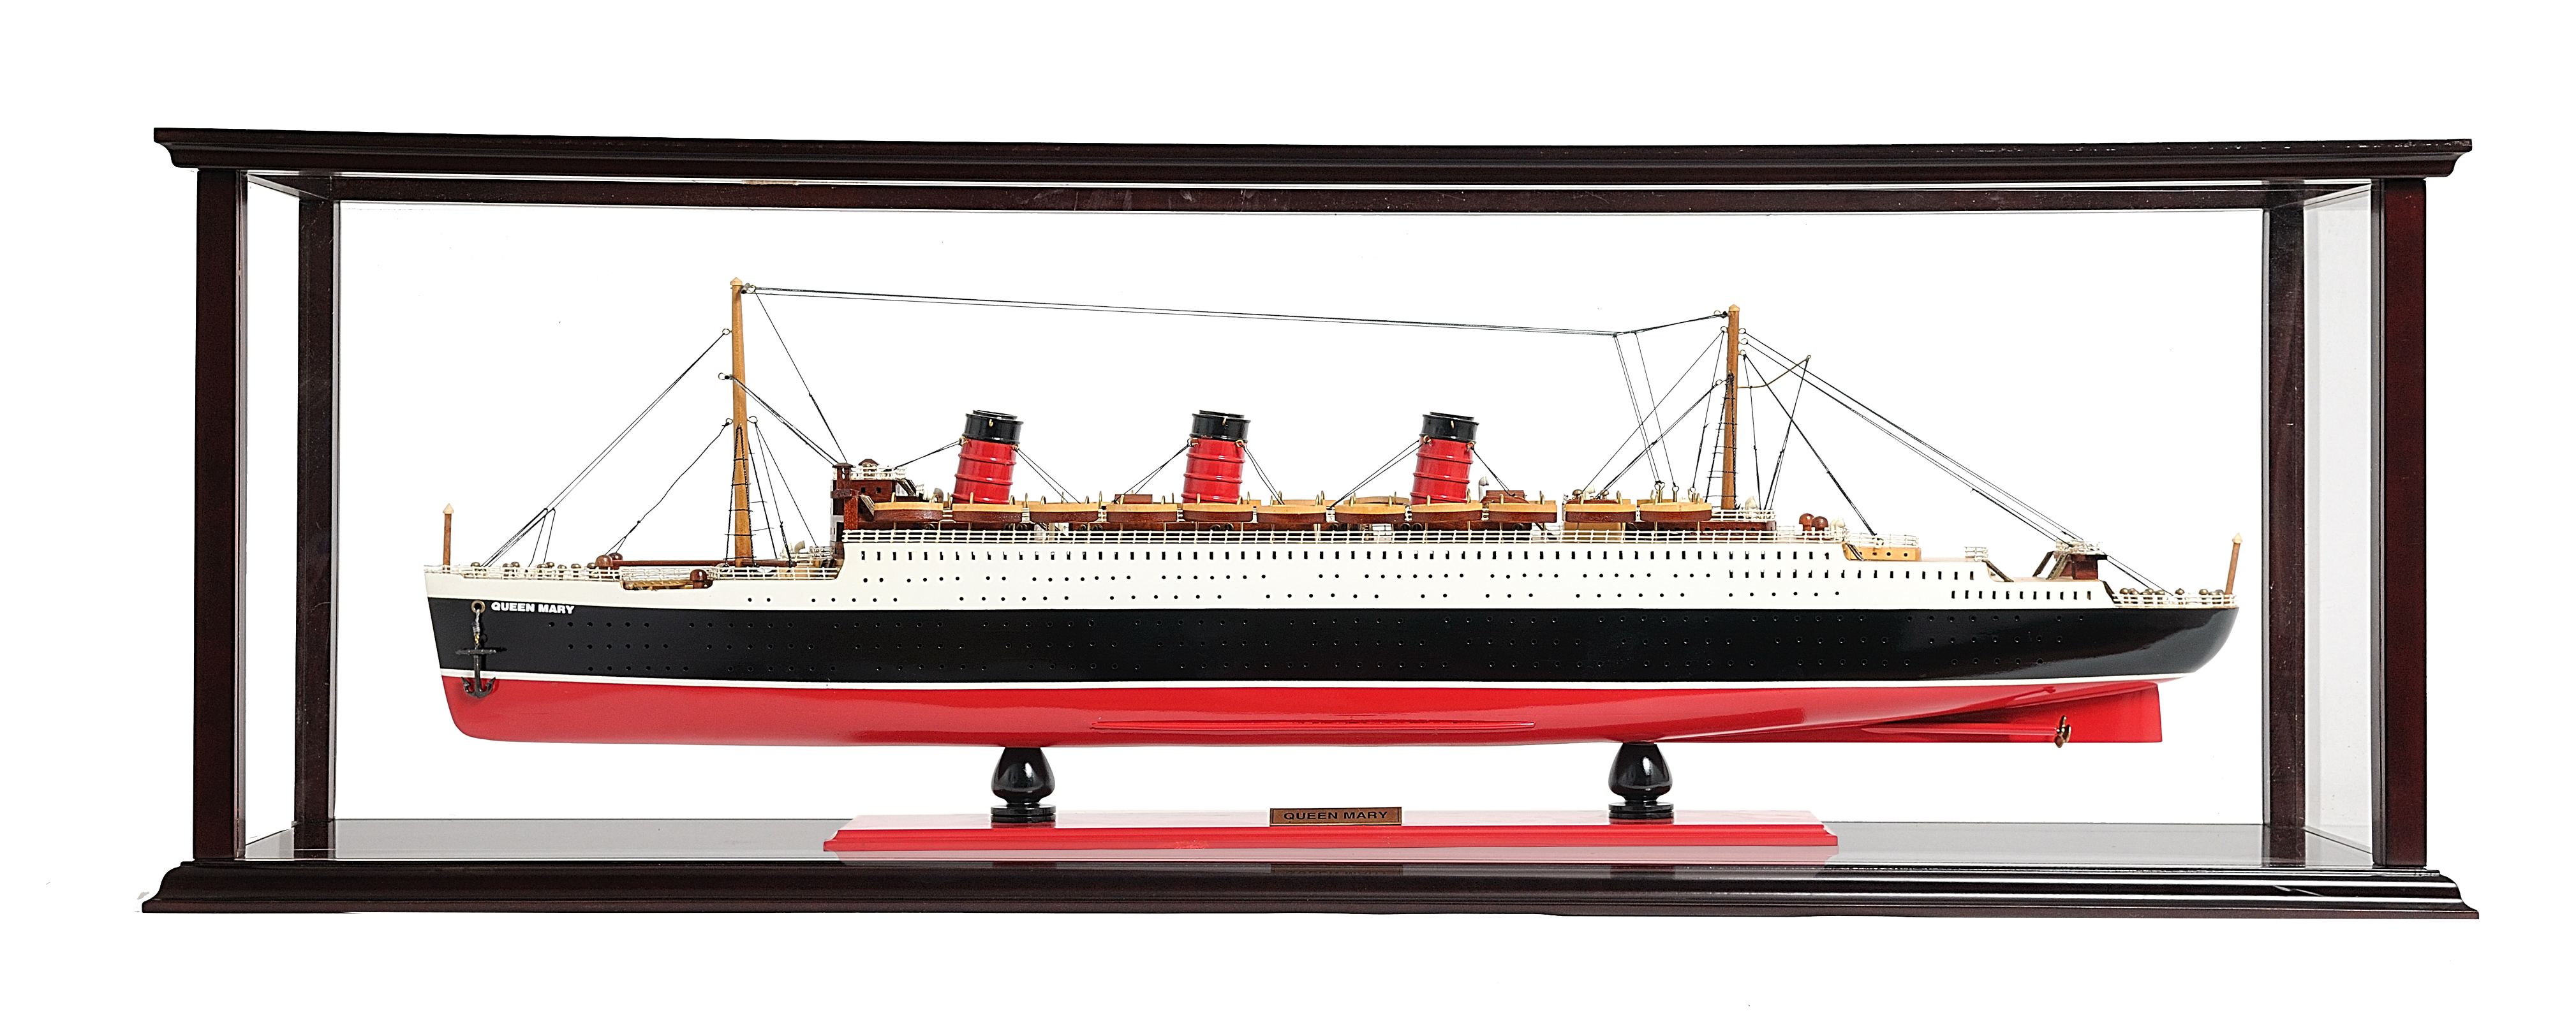 C005A Queen Mary Large with Display Case c005a-queen-mary-large-with-display-case-l01.jpg